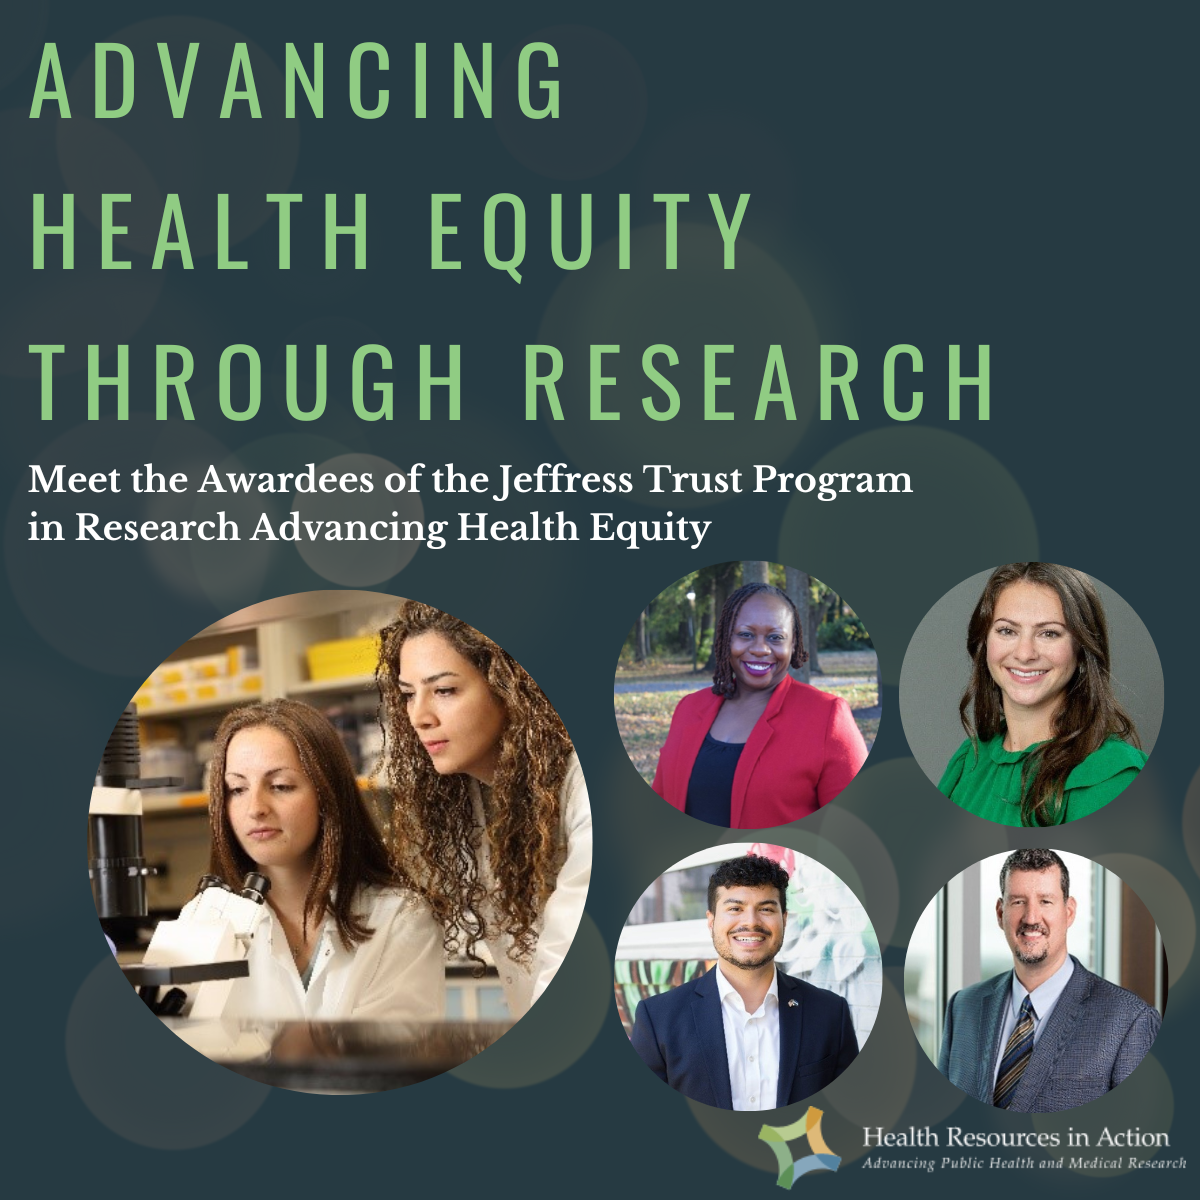 Headshots of researchers with text "Advancing Health Equity Through Research: meet the awardees of the Jeffress Trust Program in Research Advancing Health Equity"